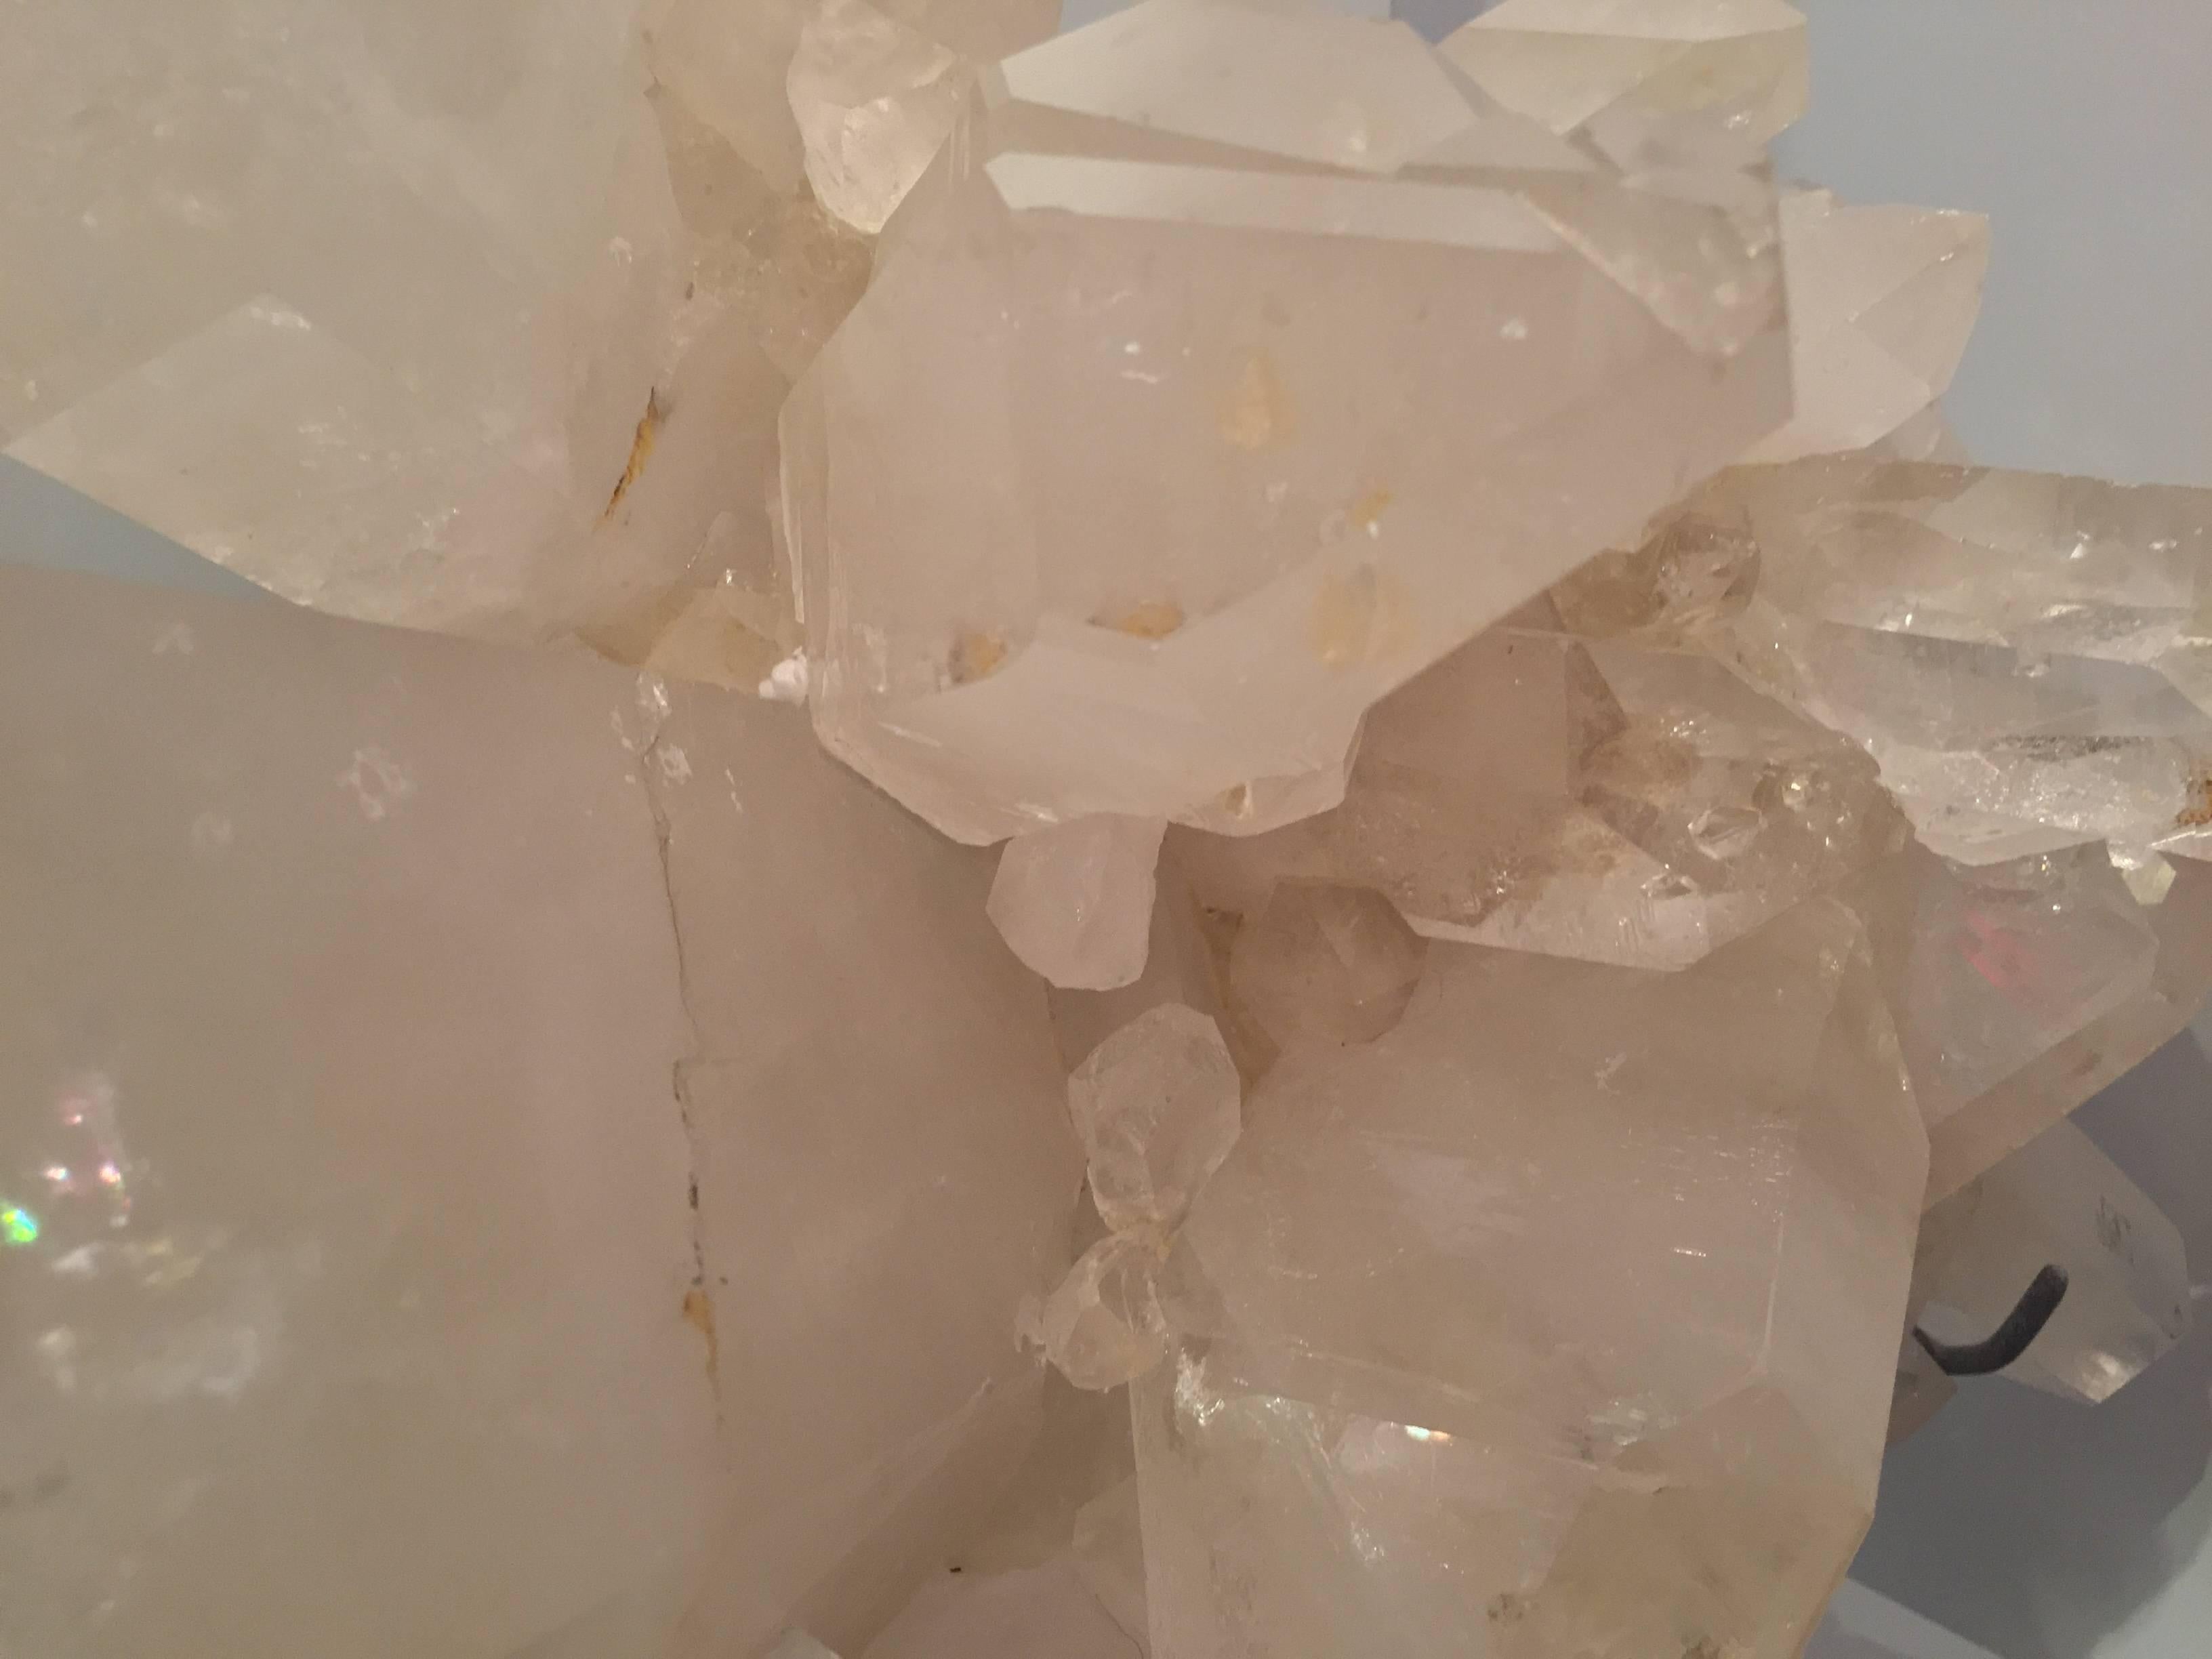 Large rock crystal quartz cluster mined in Brazil and custom mounted on a black painted metal base.

The many properties of rock crystals are well-known and include the balancing and revitalization of physical, mental and emotional needs.

Rock